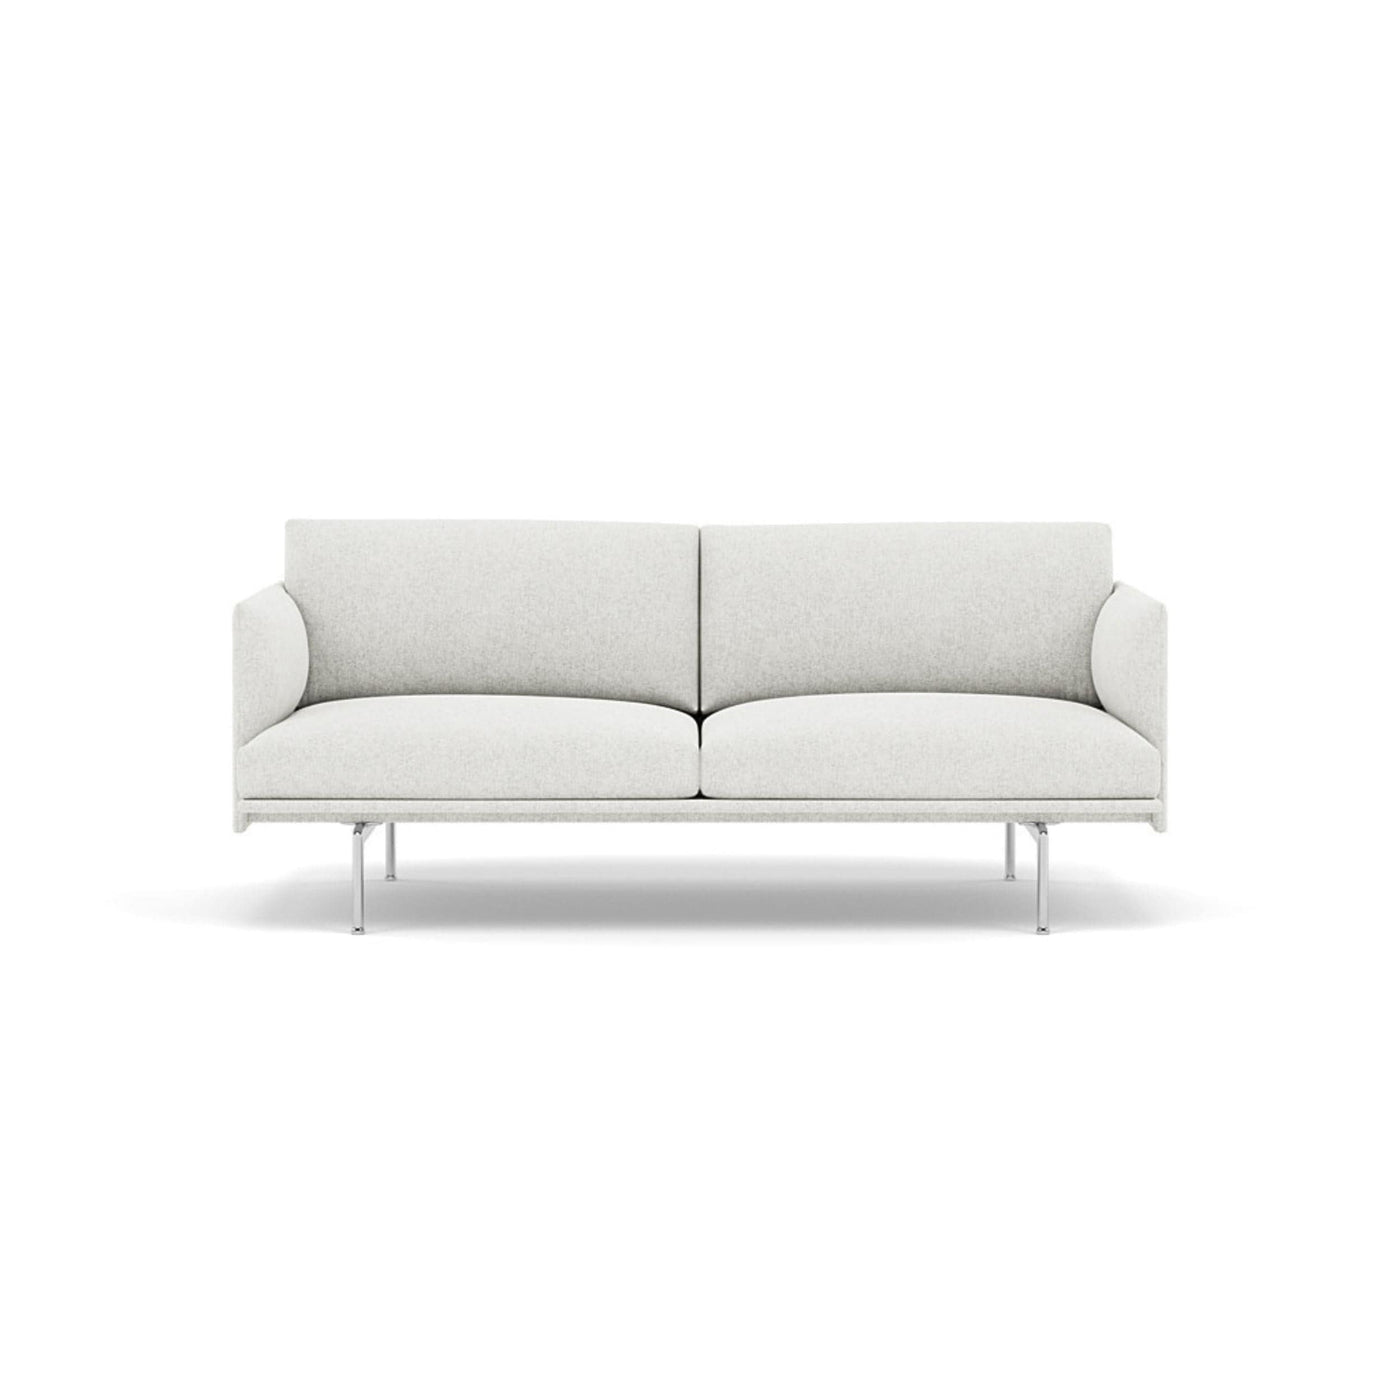 Muuto Outline Studio Sofa 170 in hallingdal 110 and polished aluminium legs. Made to order from someday designs. #colour_hallingdal-110